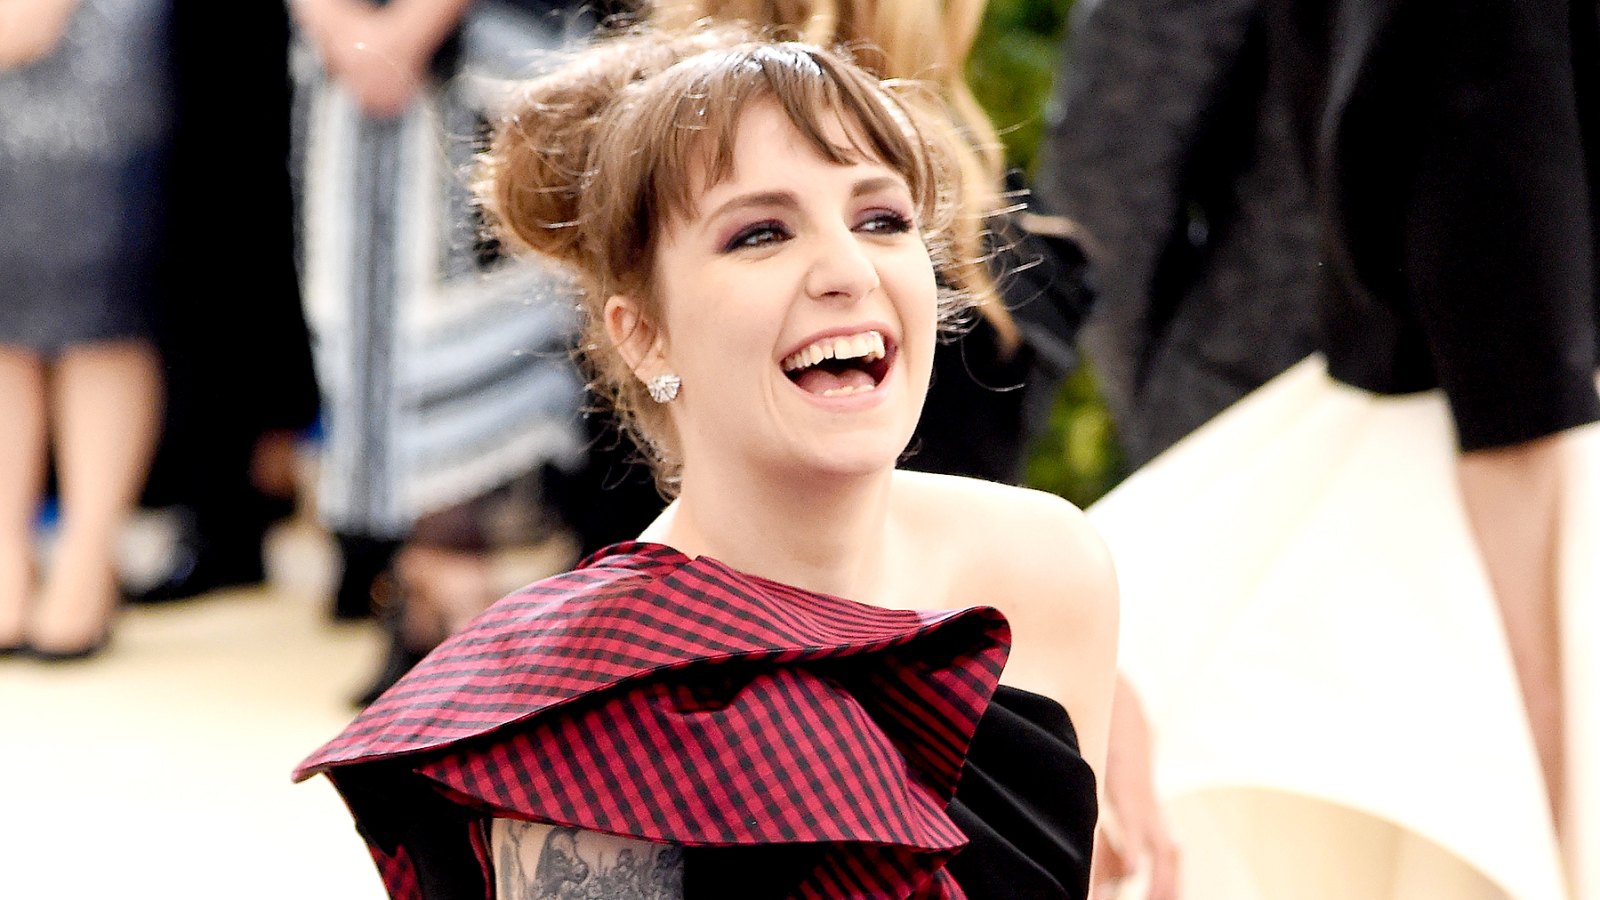 Lena Dunham attend the "Rei Kawakubo/Comme des Garcons: Art Of The In-Between" Costume Institute Gala at Metropolitan Museum of Art on May 1, 2017 in New York City.